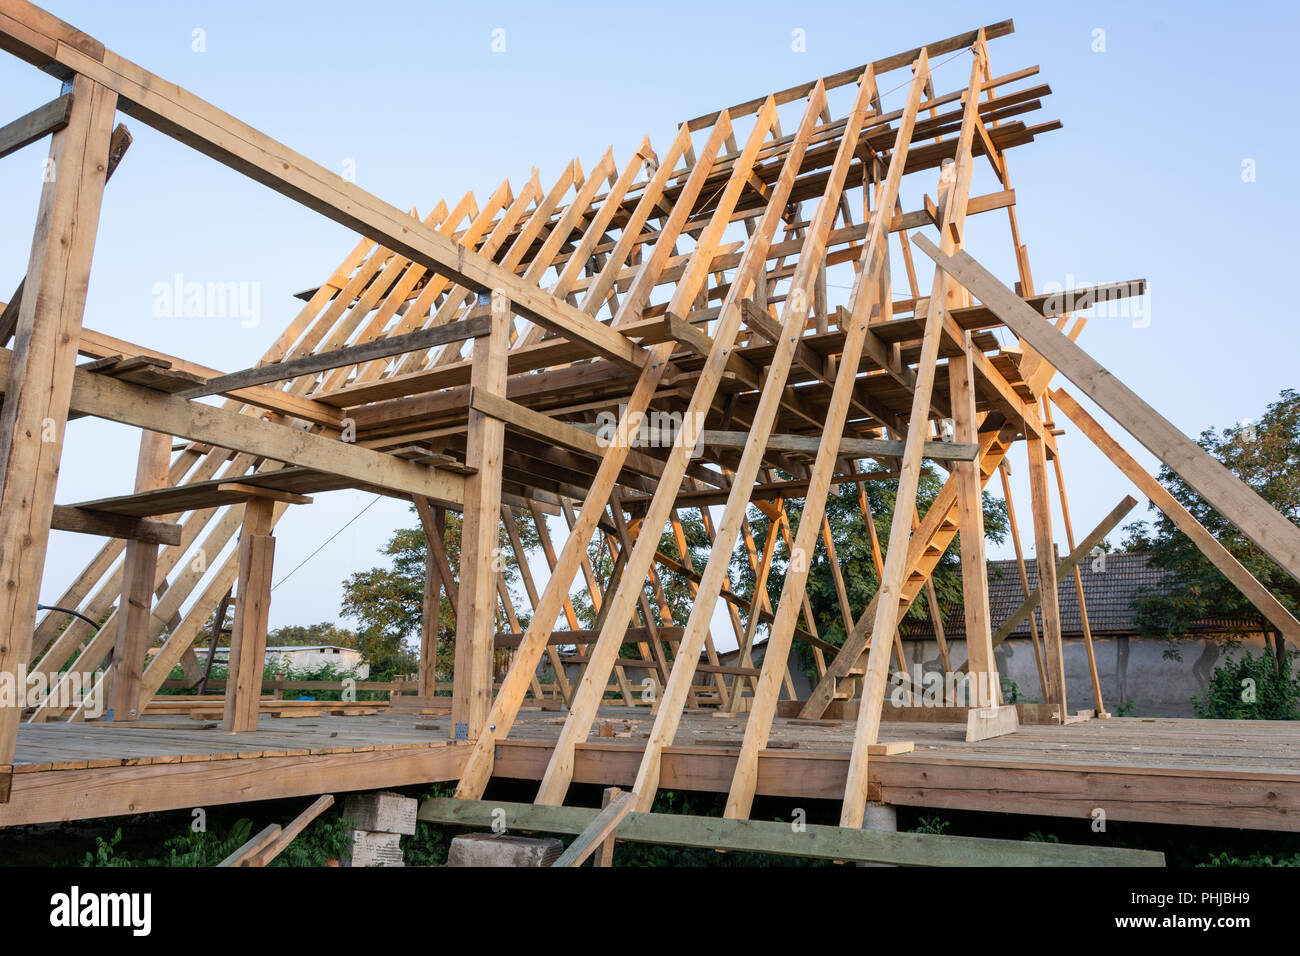 Wooden Rafters Of A New Home Under Construction At Sunset